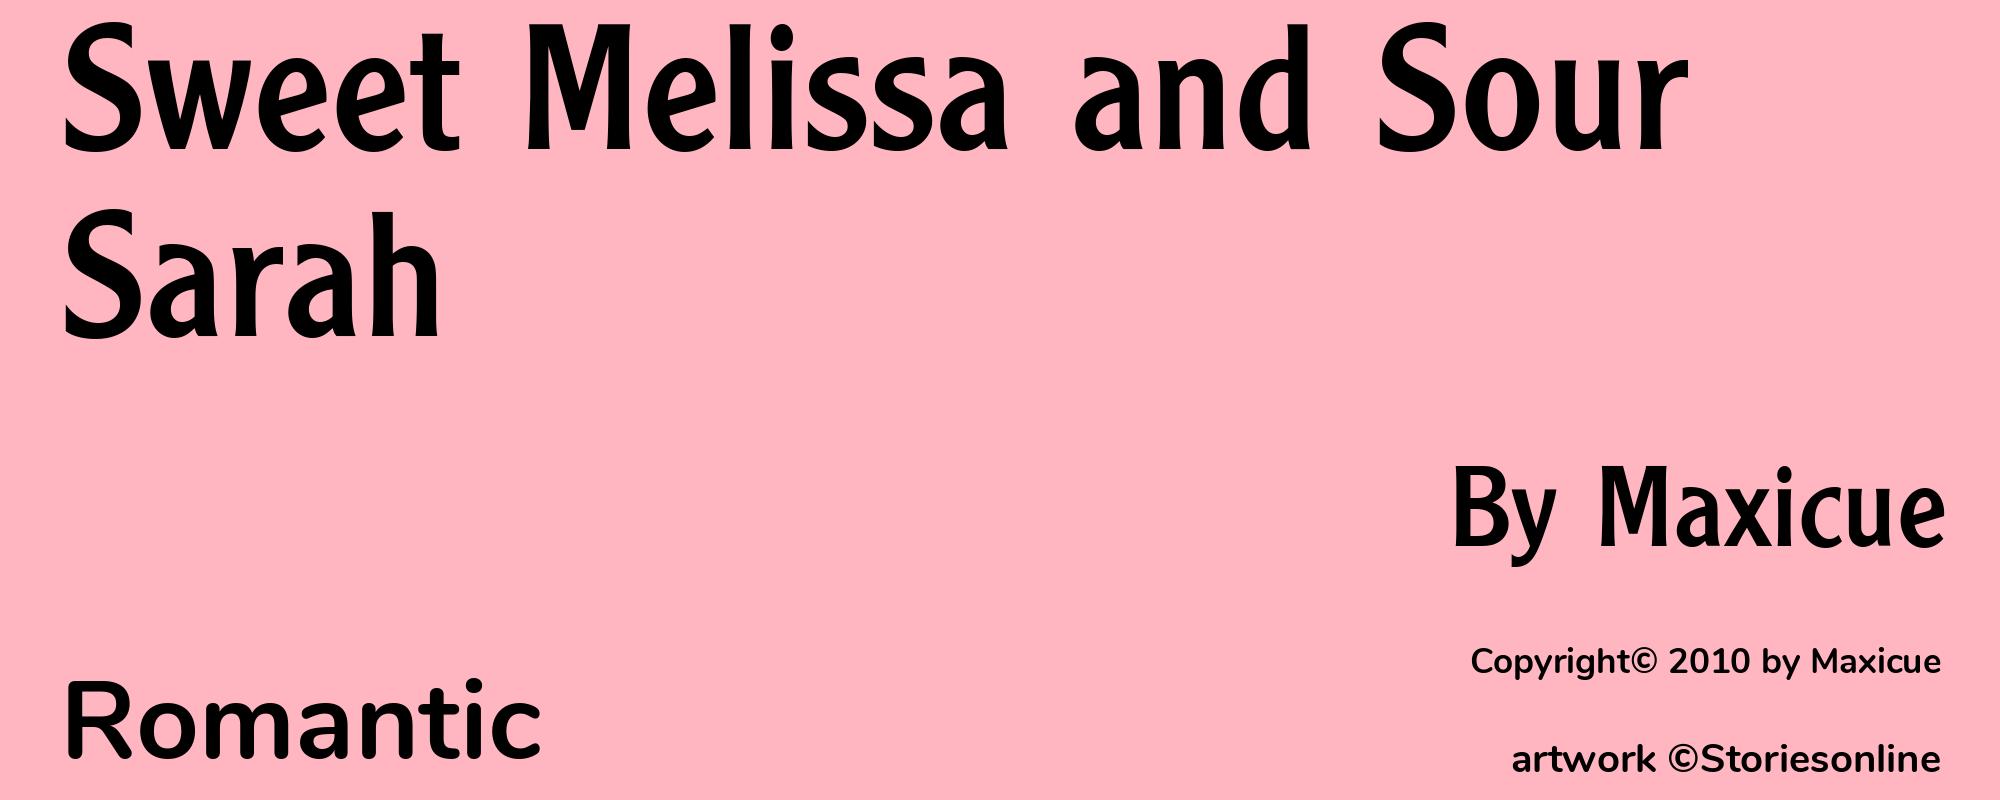 Sweet Melissa and Sour Sarah - Cover